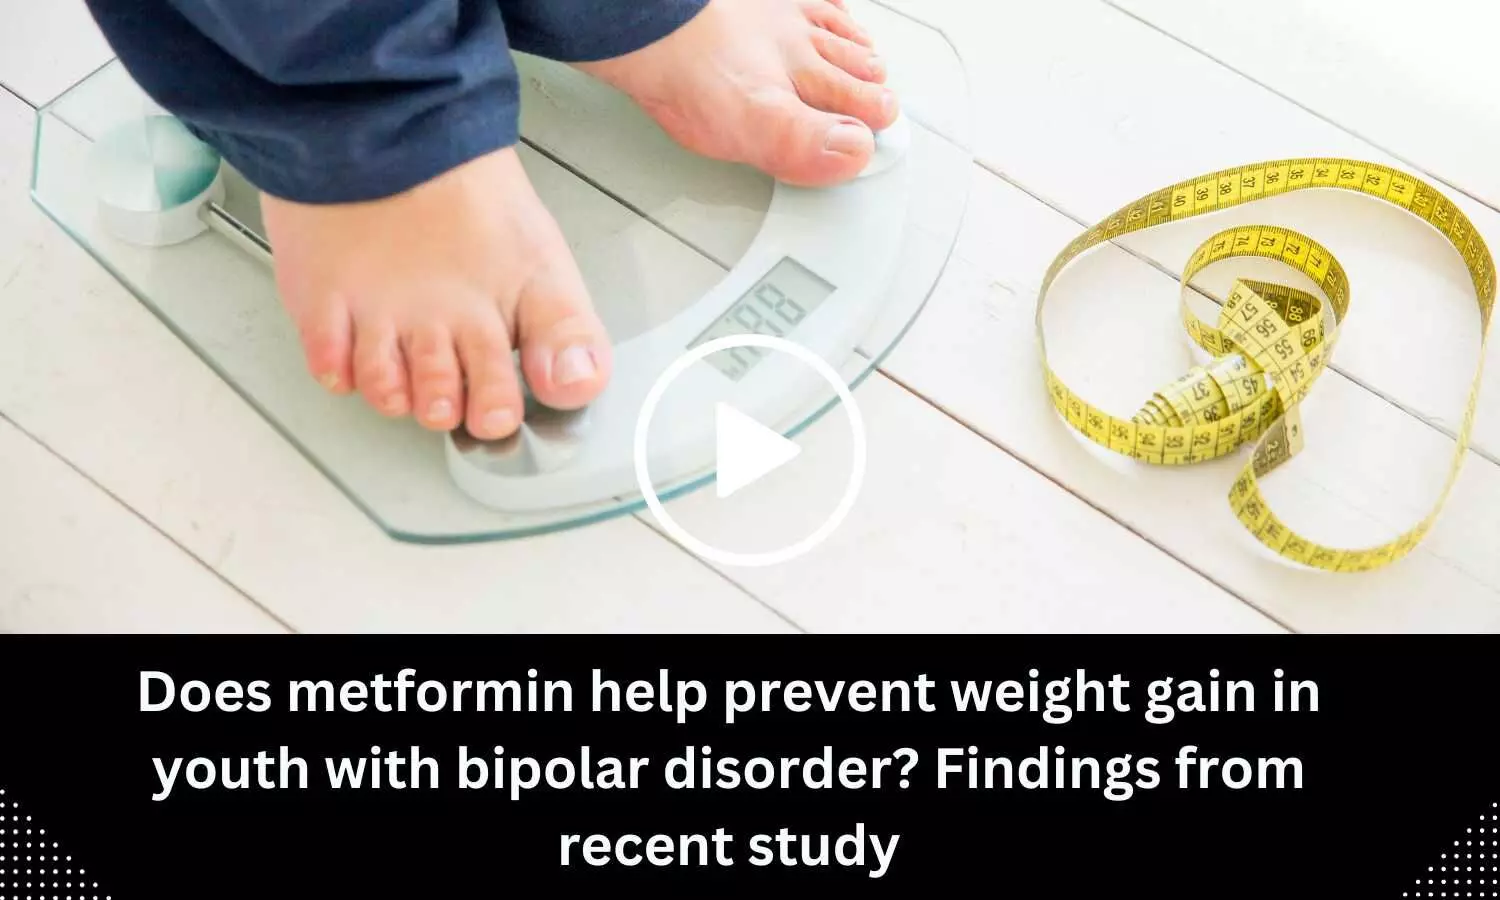 Does metformin help prevent weight gain in youth with bipolar disorder? Findings from recent study